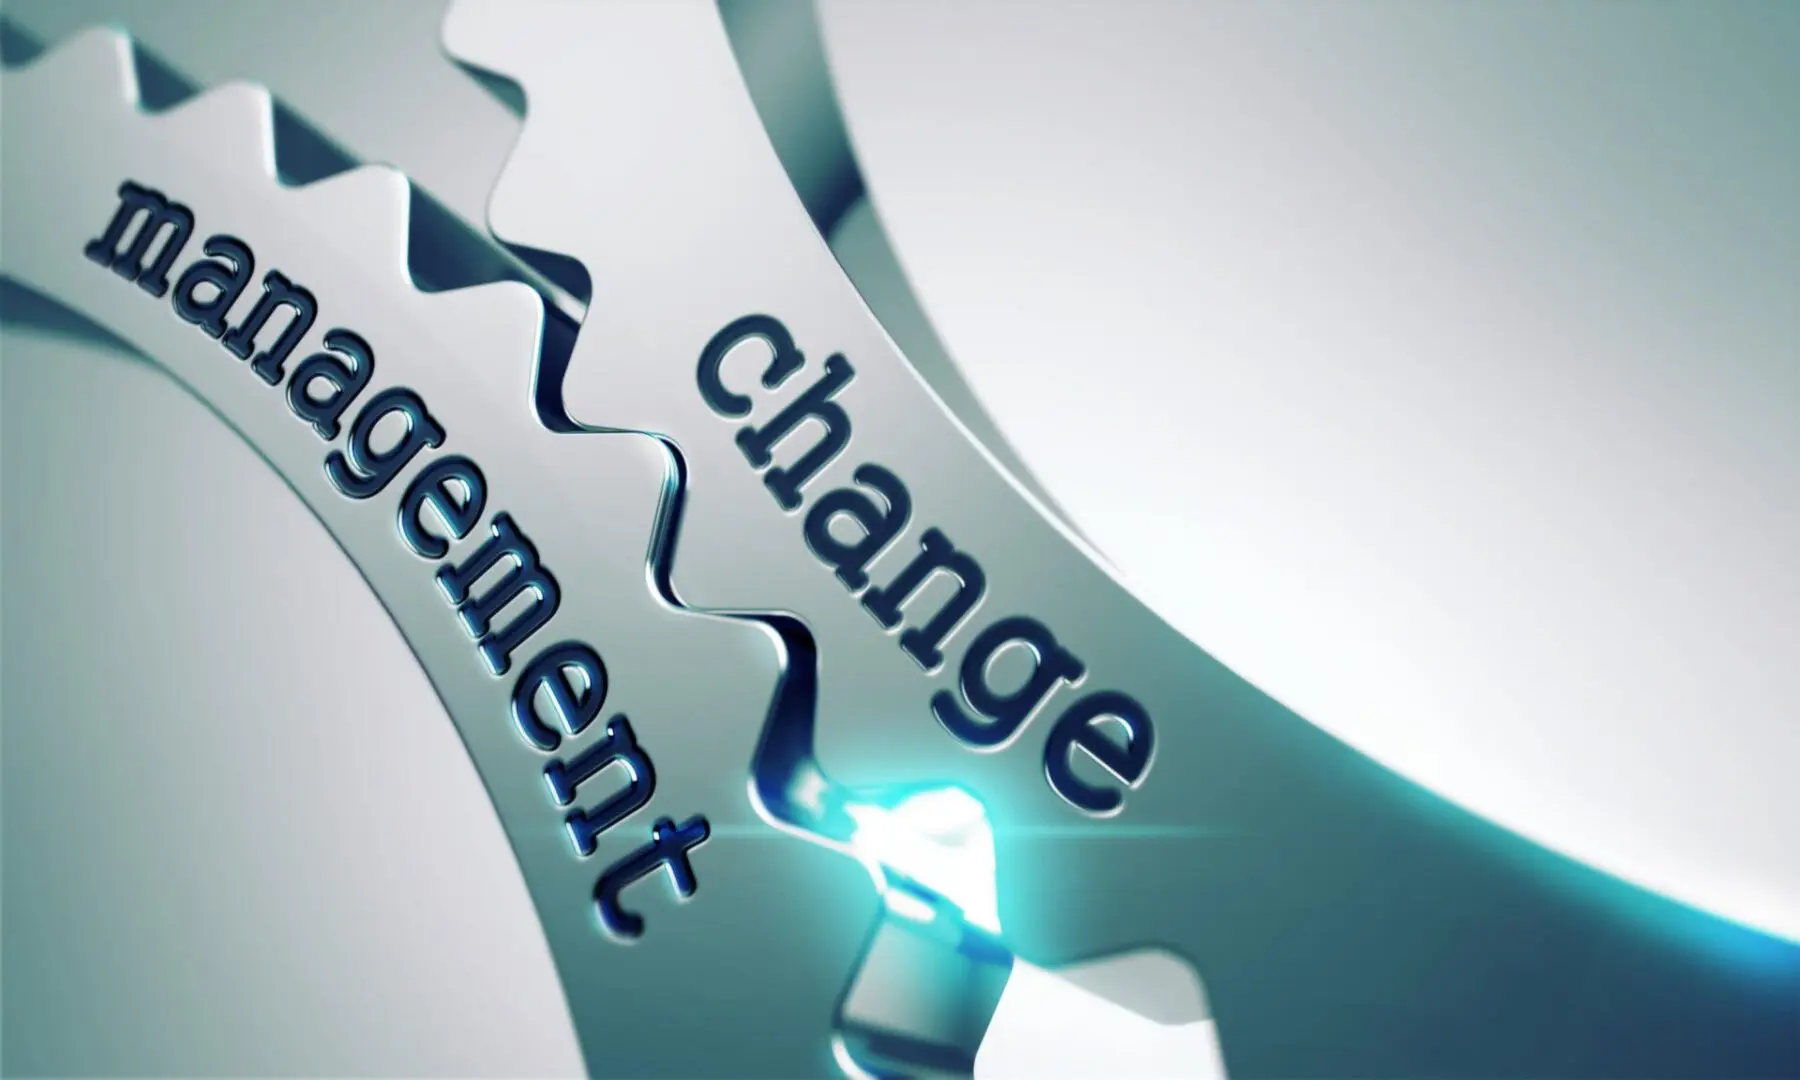 Change,Management,Concept,On,The,Mechanism,Of,Shiny,Metal,Gears.